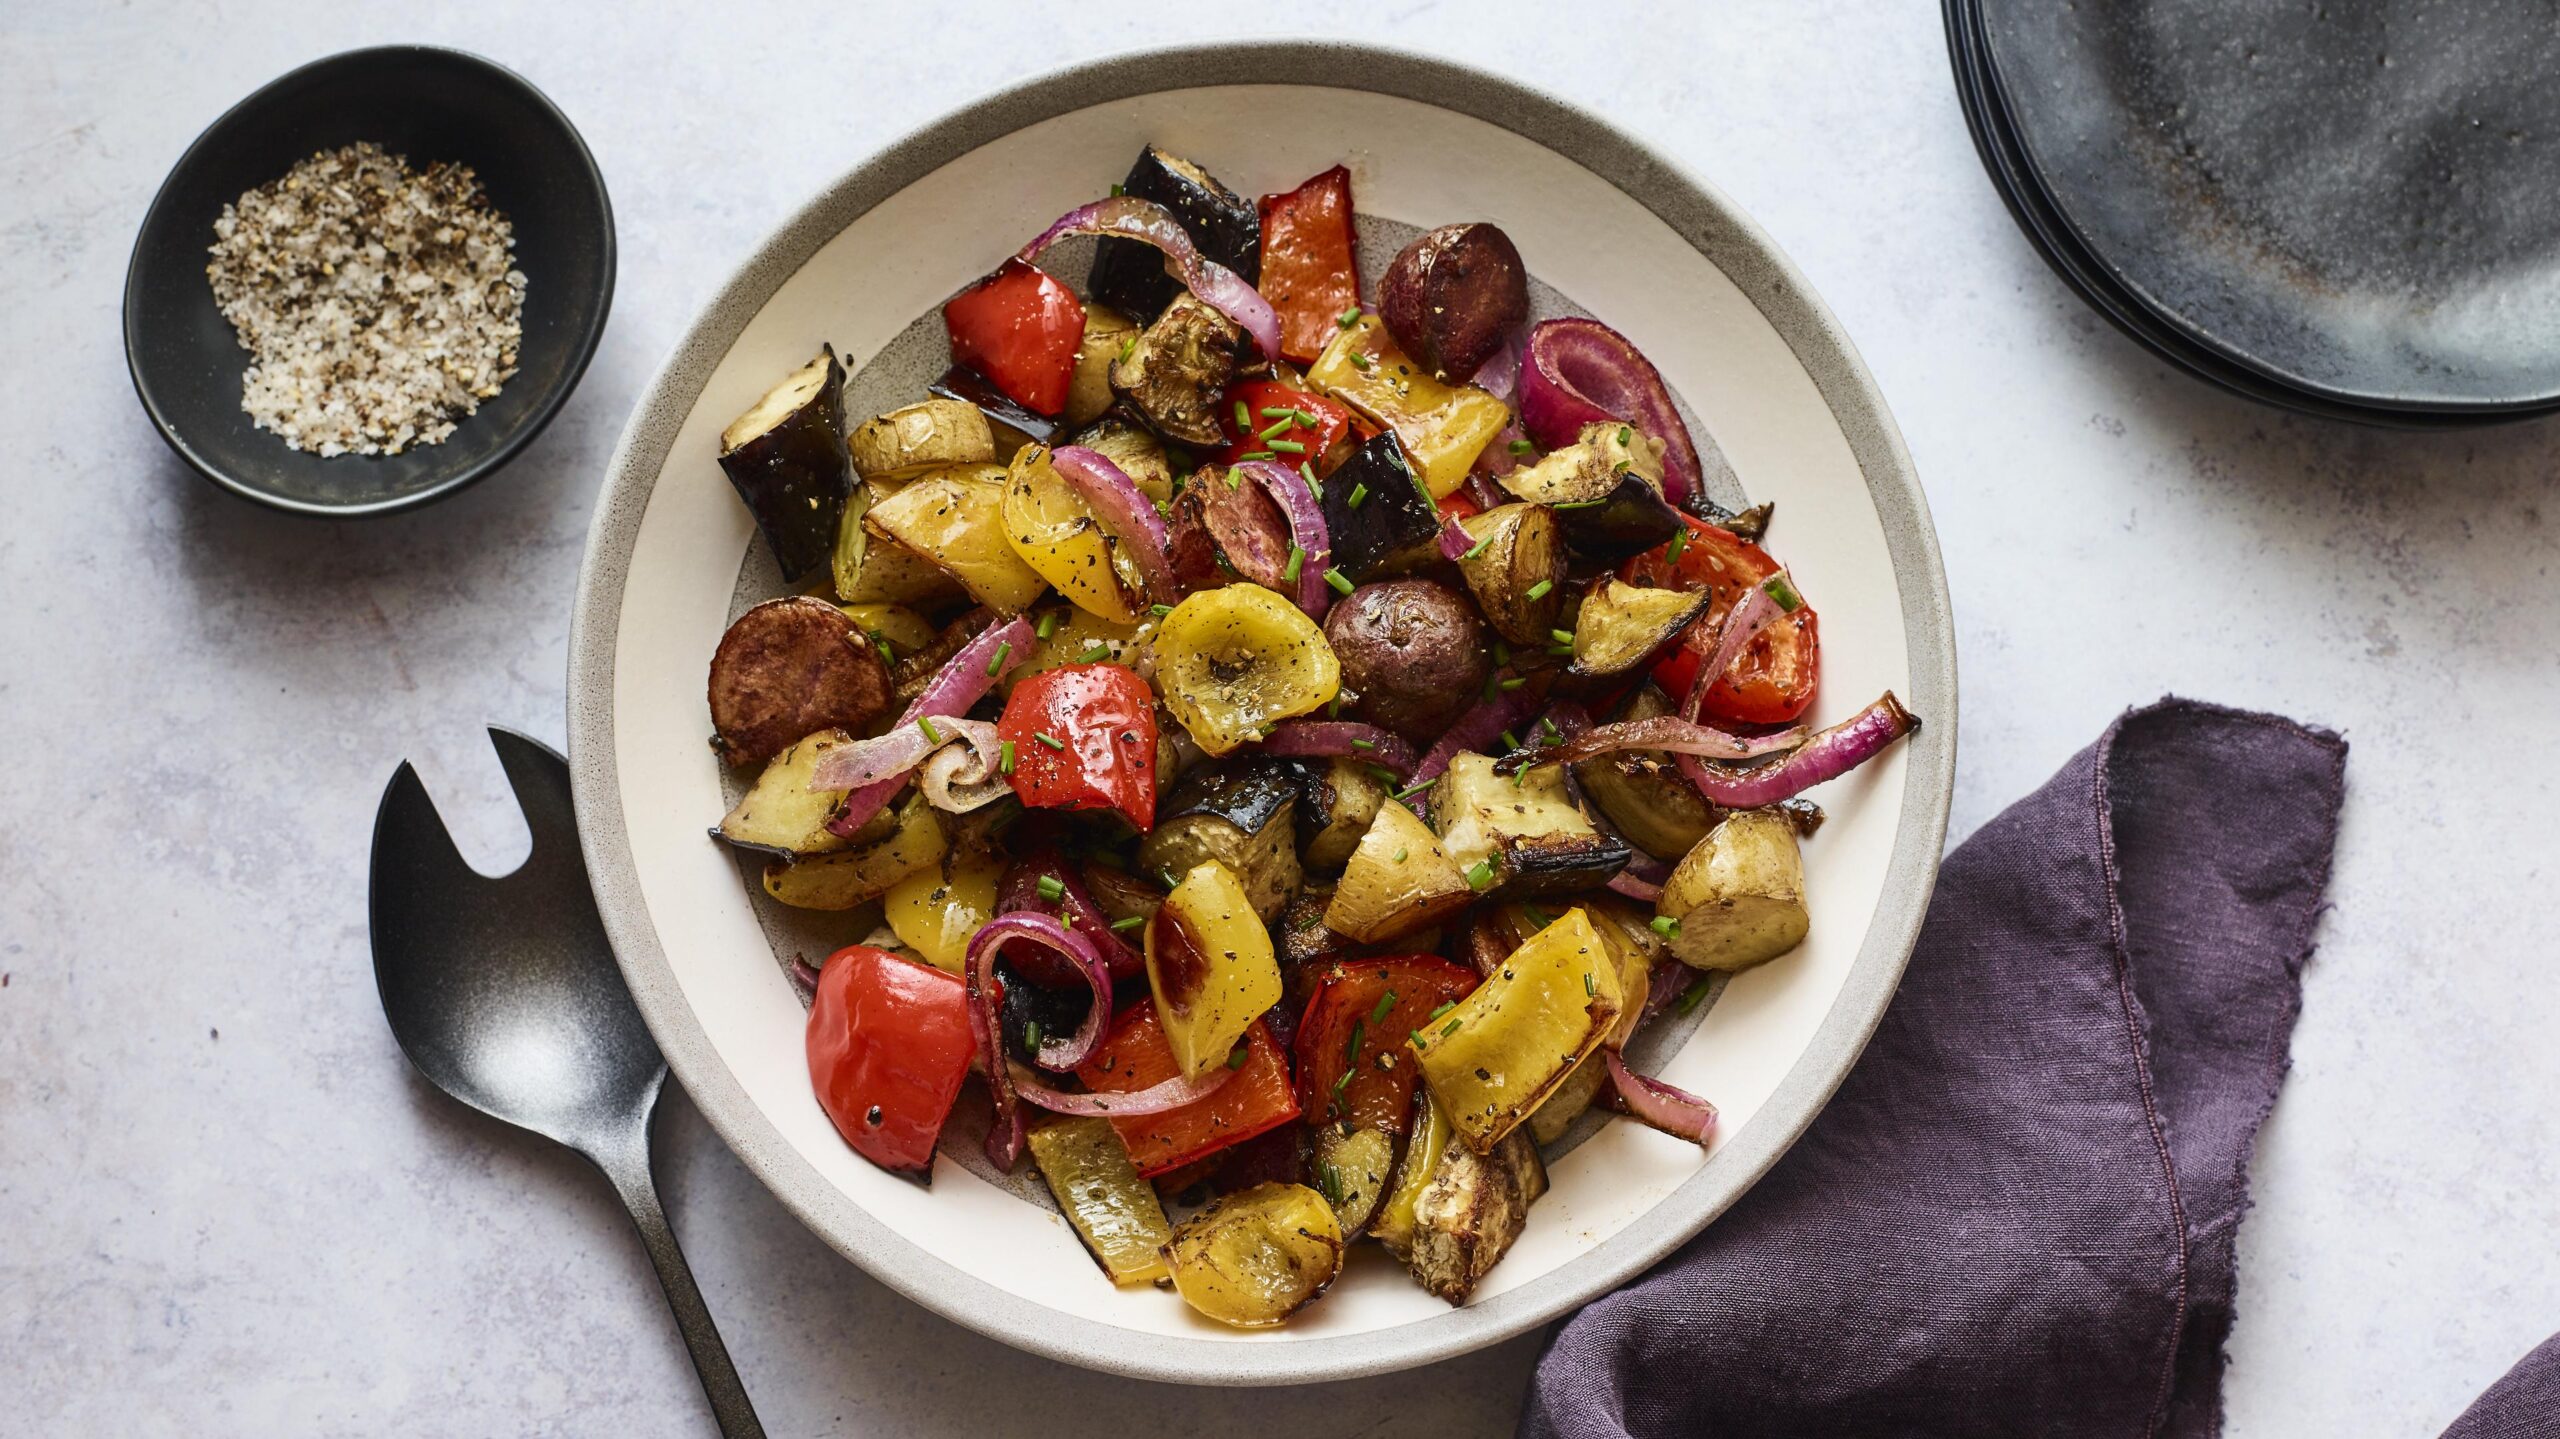  Bring a taste of the Mediterranean to your dinner table with this scrumptious dish